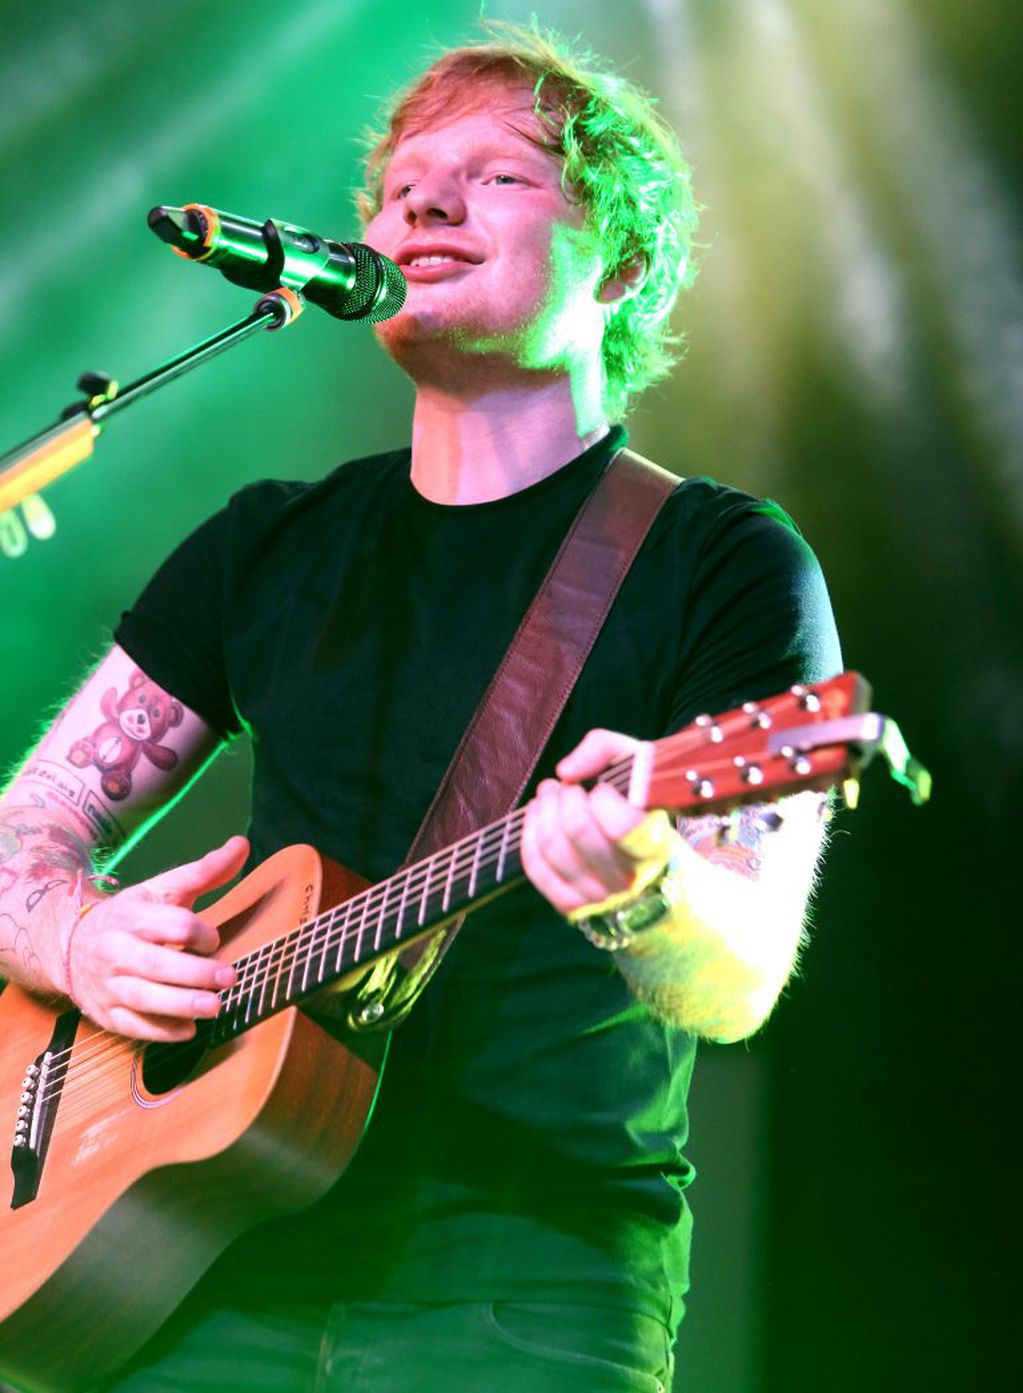 Singer-songwriter Ed Sheeran performs in concert during the Mix 106.5 Summer Blast at Power Plant Live on Tuesday, July 1, 2014, in Baltimore. (Photo by Owen Sweeney/Invision/AP) eeuu baltimore Ed Sheeran recital  Mix 106.5 Summer Blast musica musicos